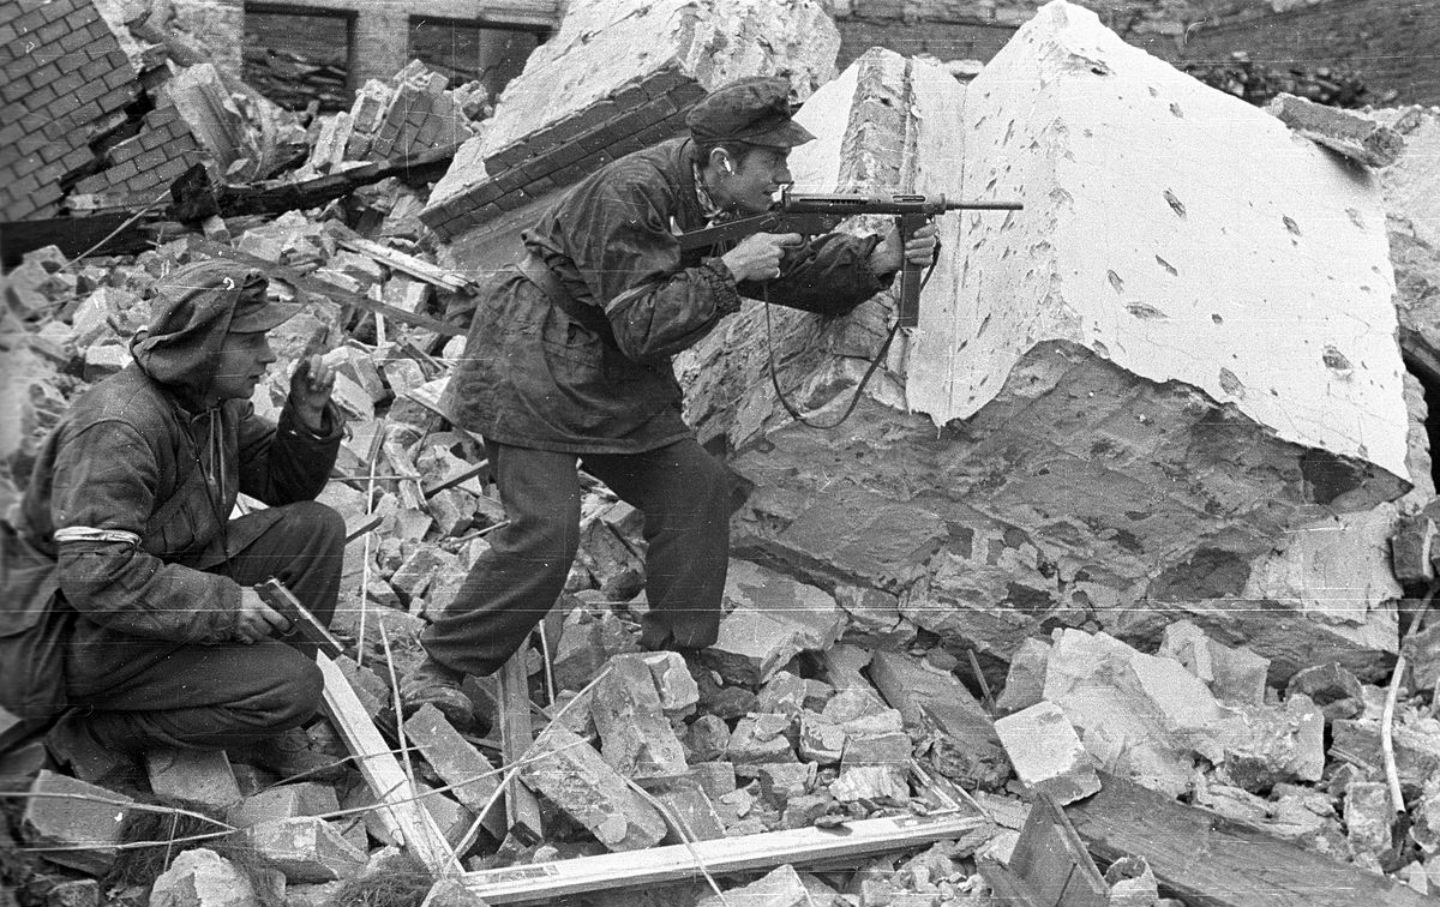 August 1, 1944: The Warsaw Uprising